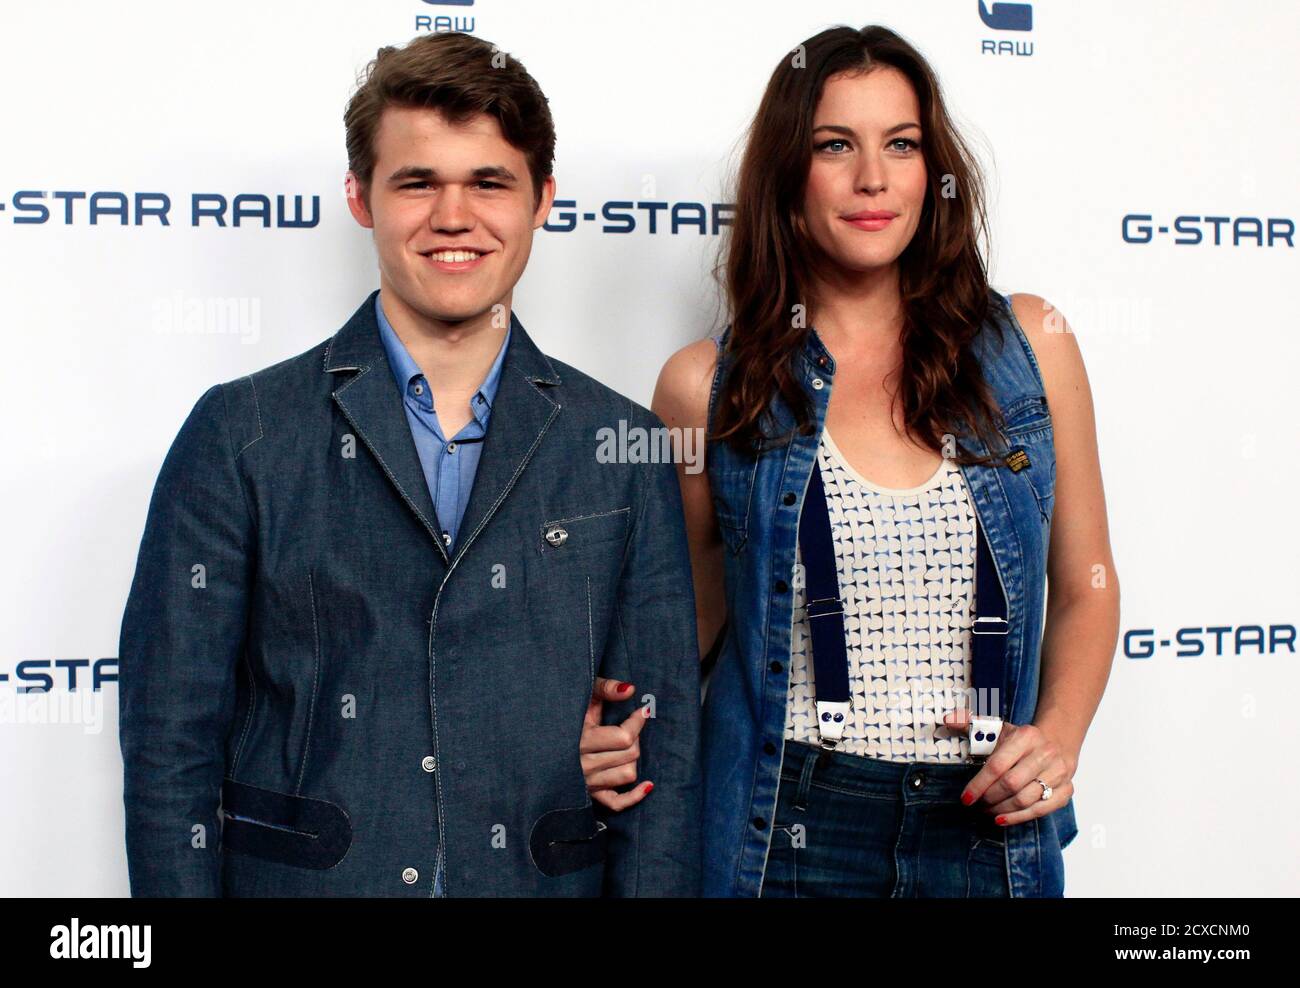 Norwegian chess champion Magnus Carlsen enters the red carpet with actress Liv  Tyler as front row special guests at the G-Star RAW Spring/Summer 2011  collection during New York Fashion Week, September 14,